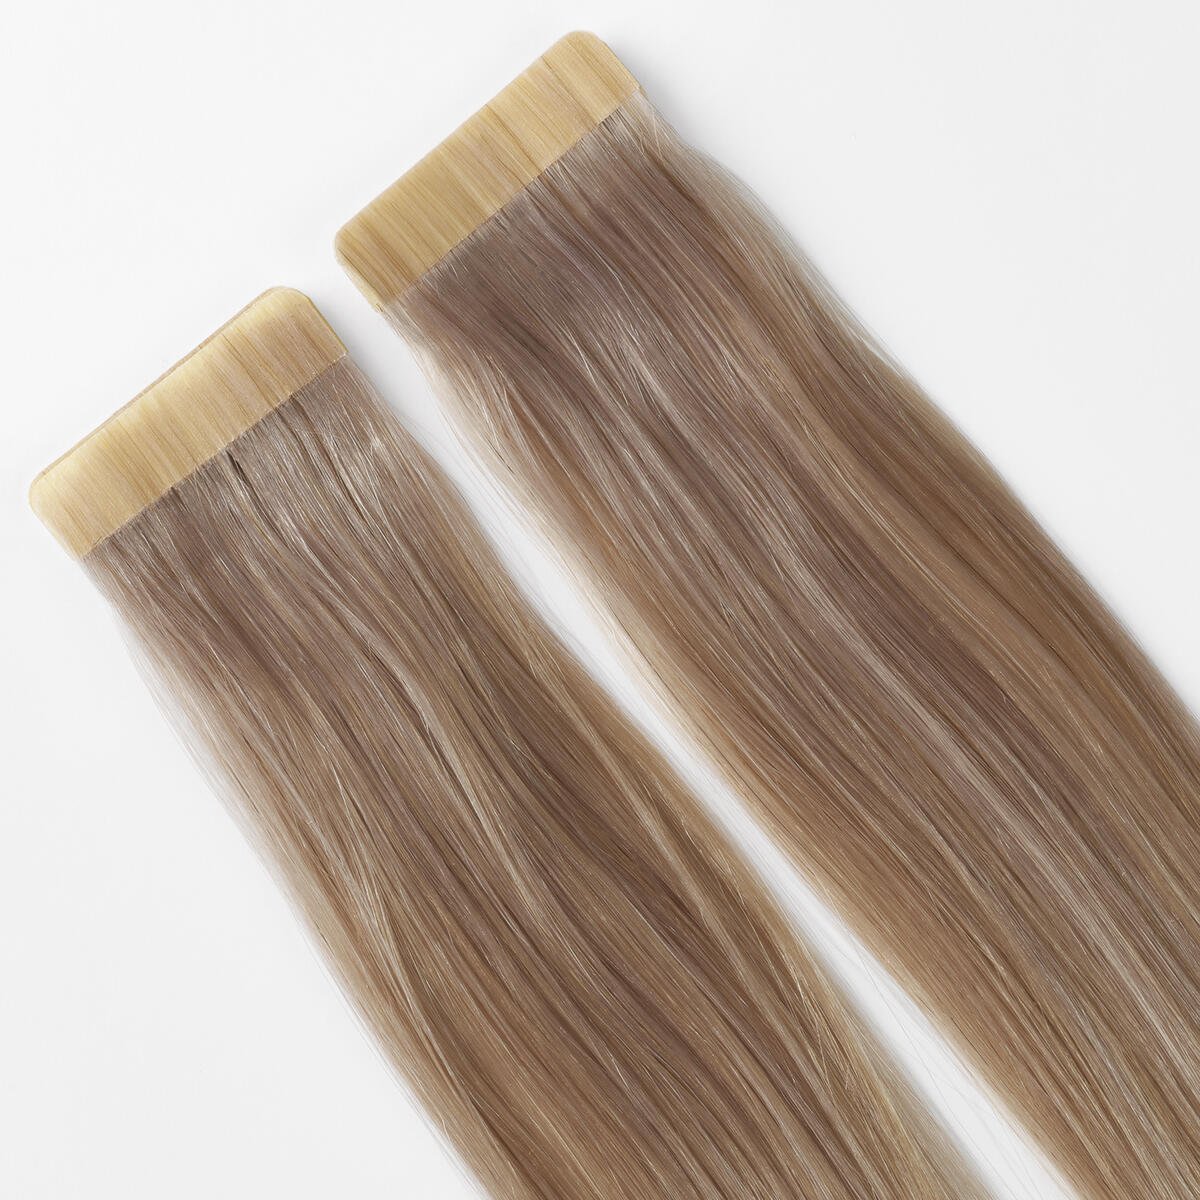 Basic Tape Extensions Classic 4 10.5 Grey 50 cm